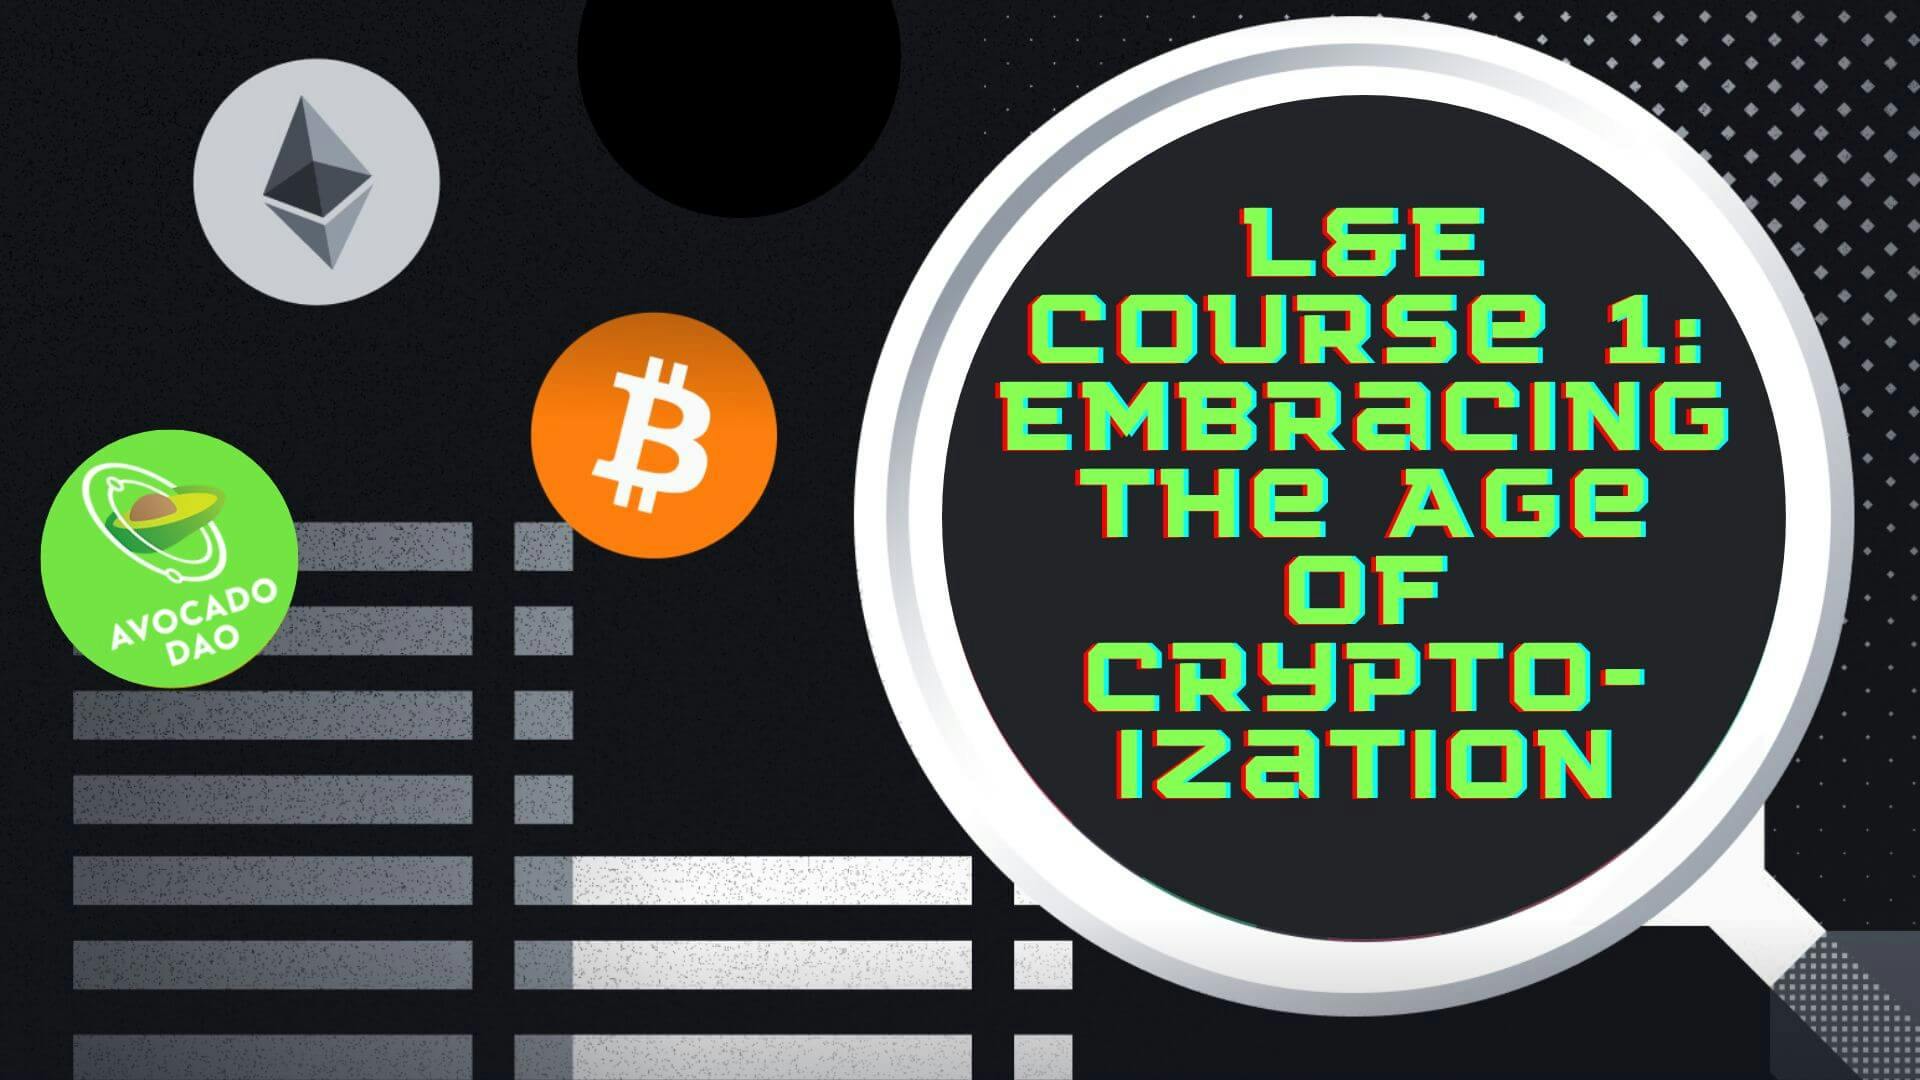 Web3 L&E Course #1: Embracing the age of cryptoization